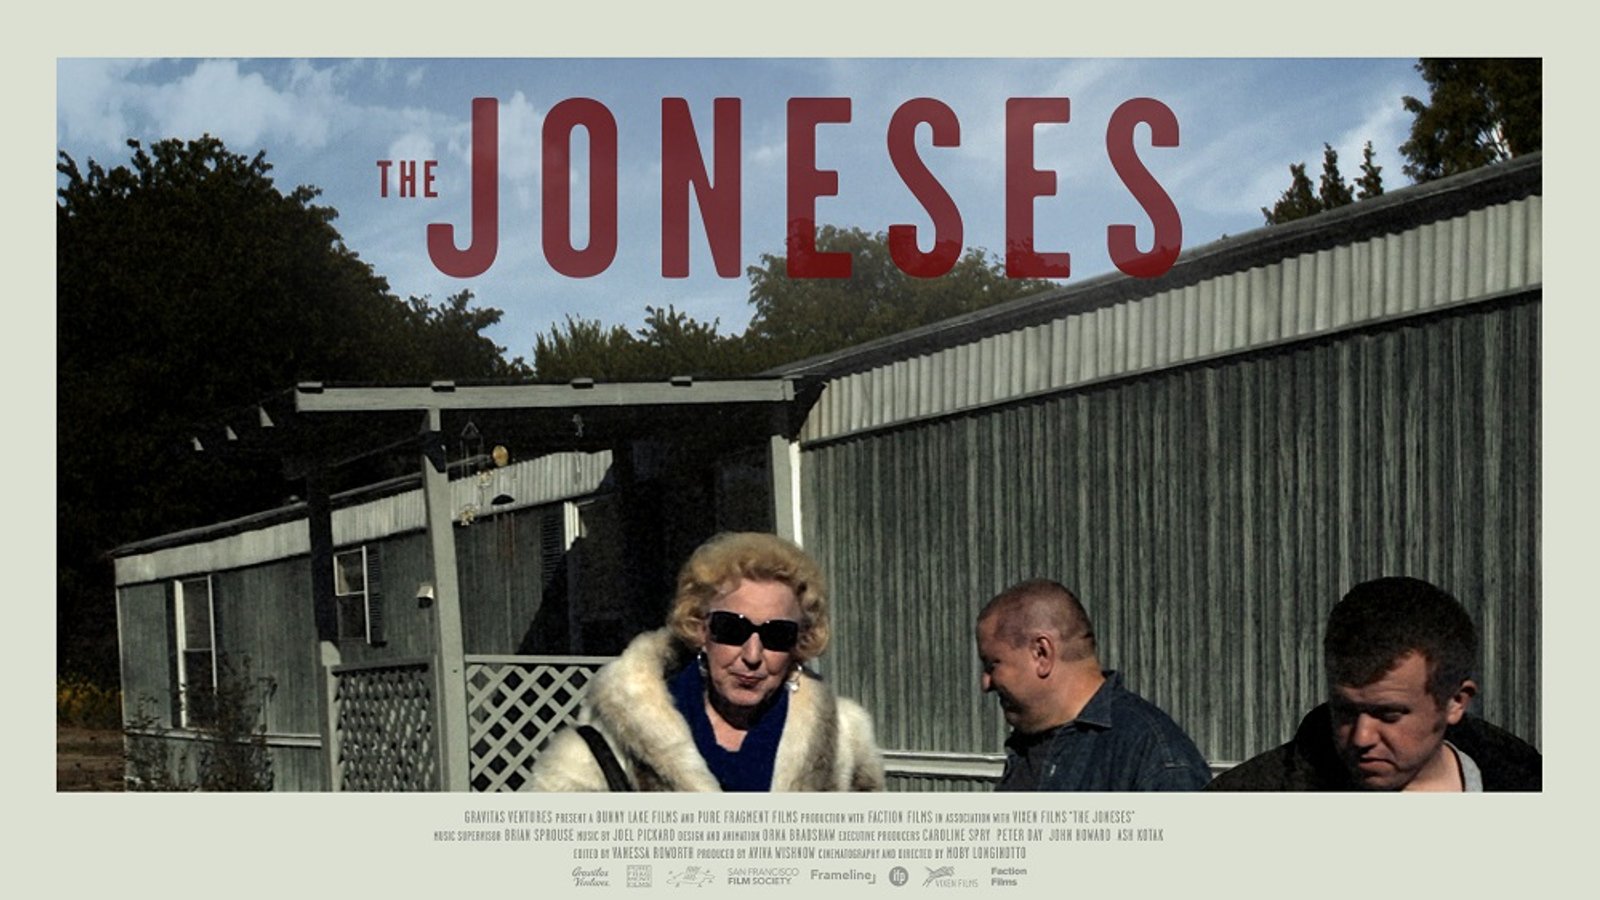 The Joneses - A Transgender Grandmother and Her Family